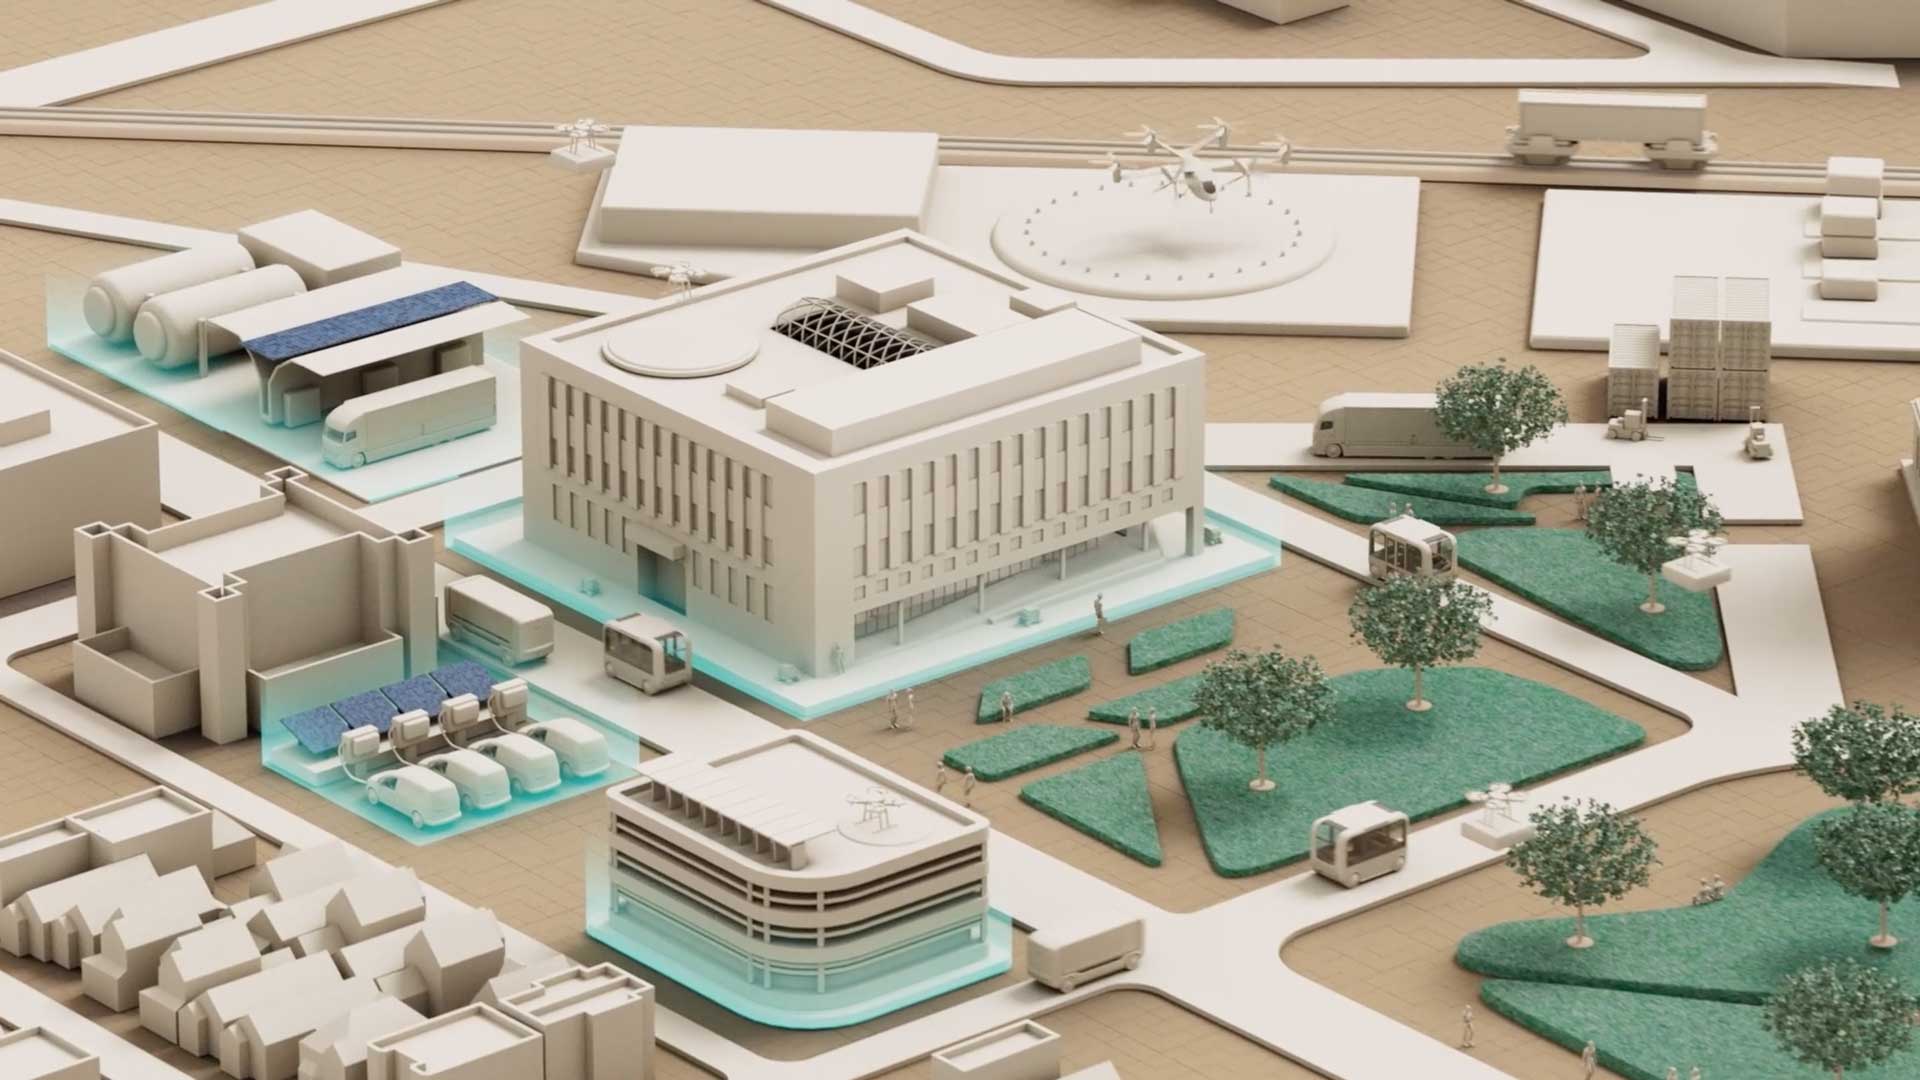 Newlab at Michigan Central Explainer by Lunar North | STASH MAGAZINE